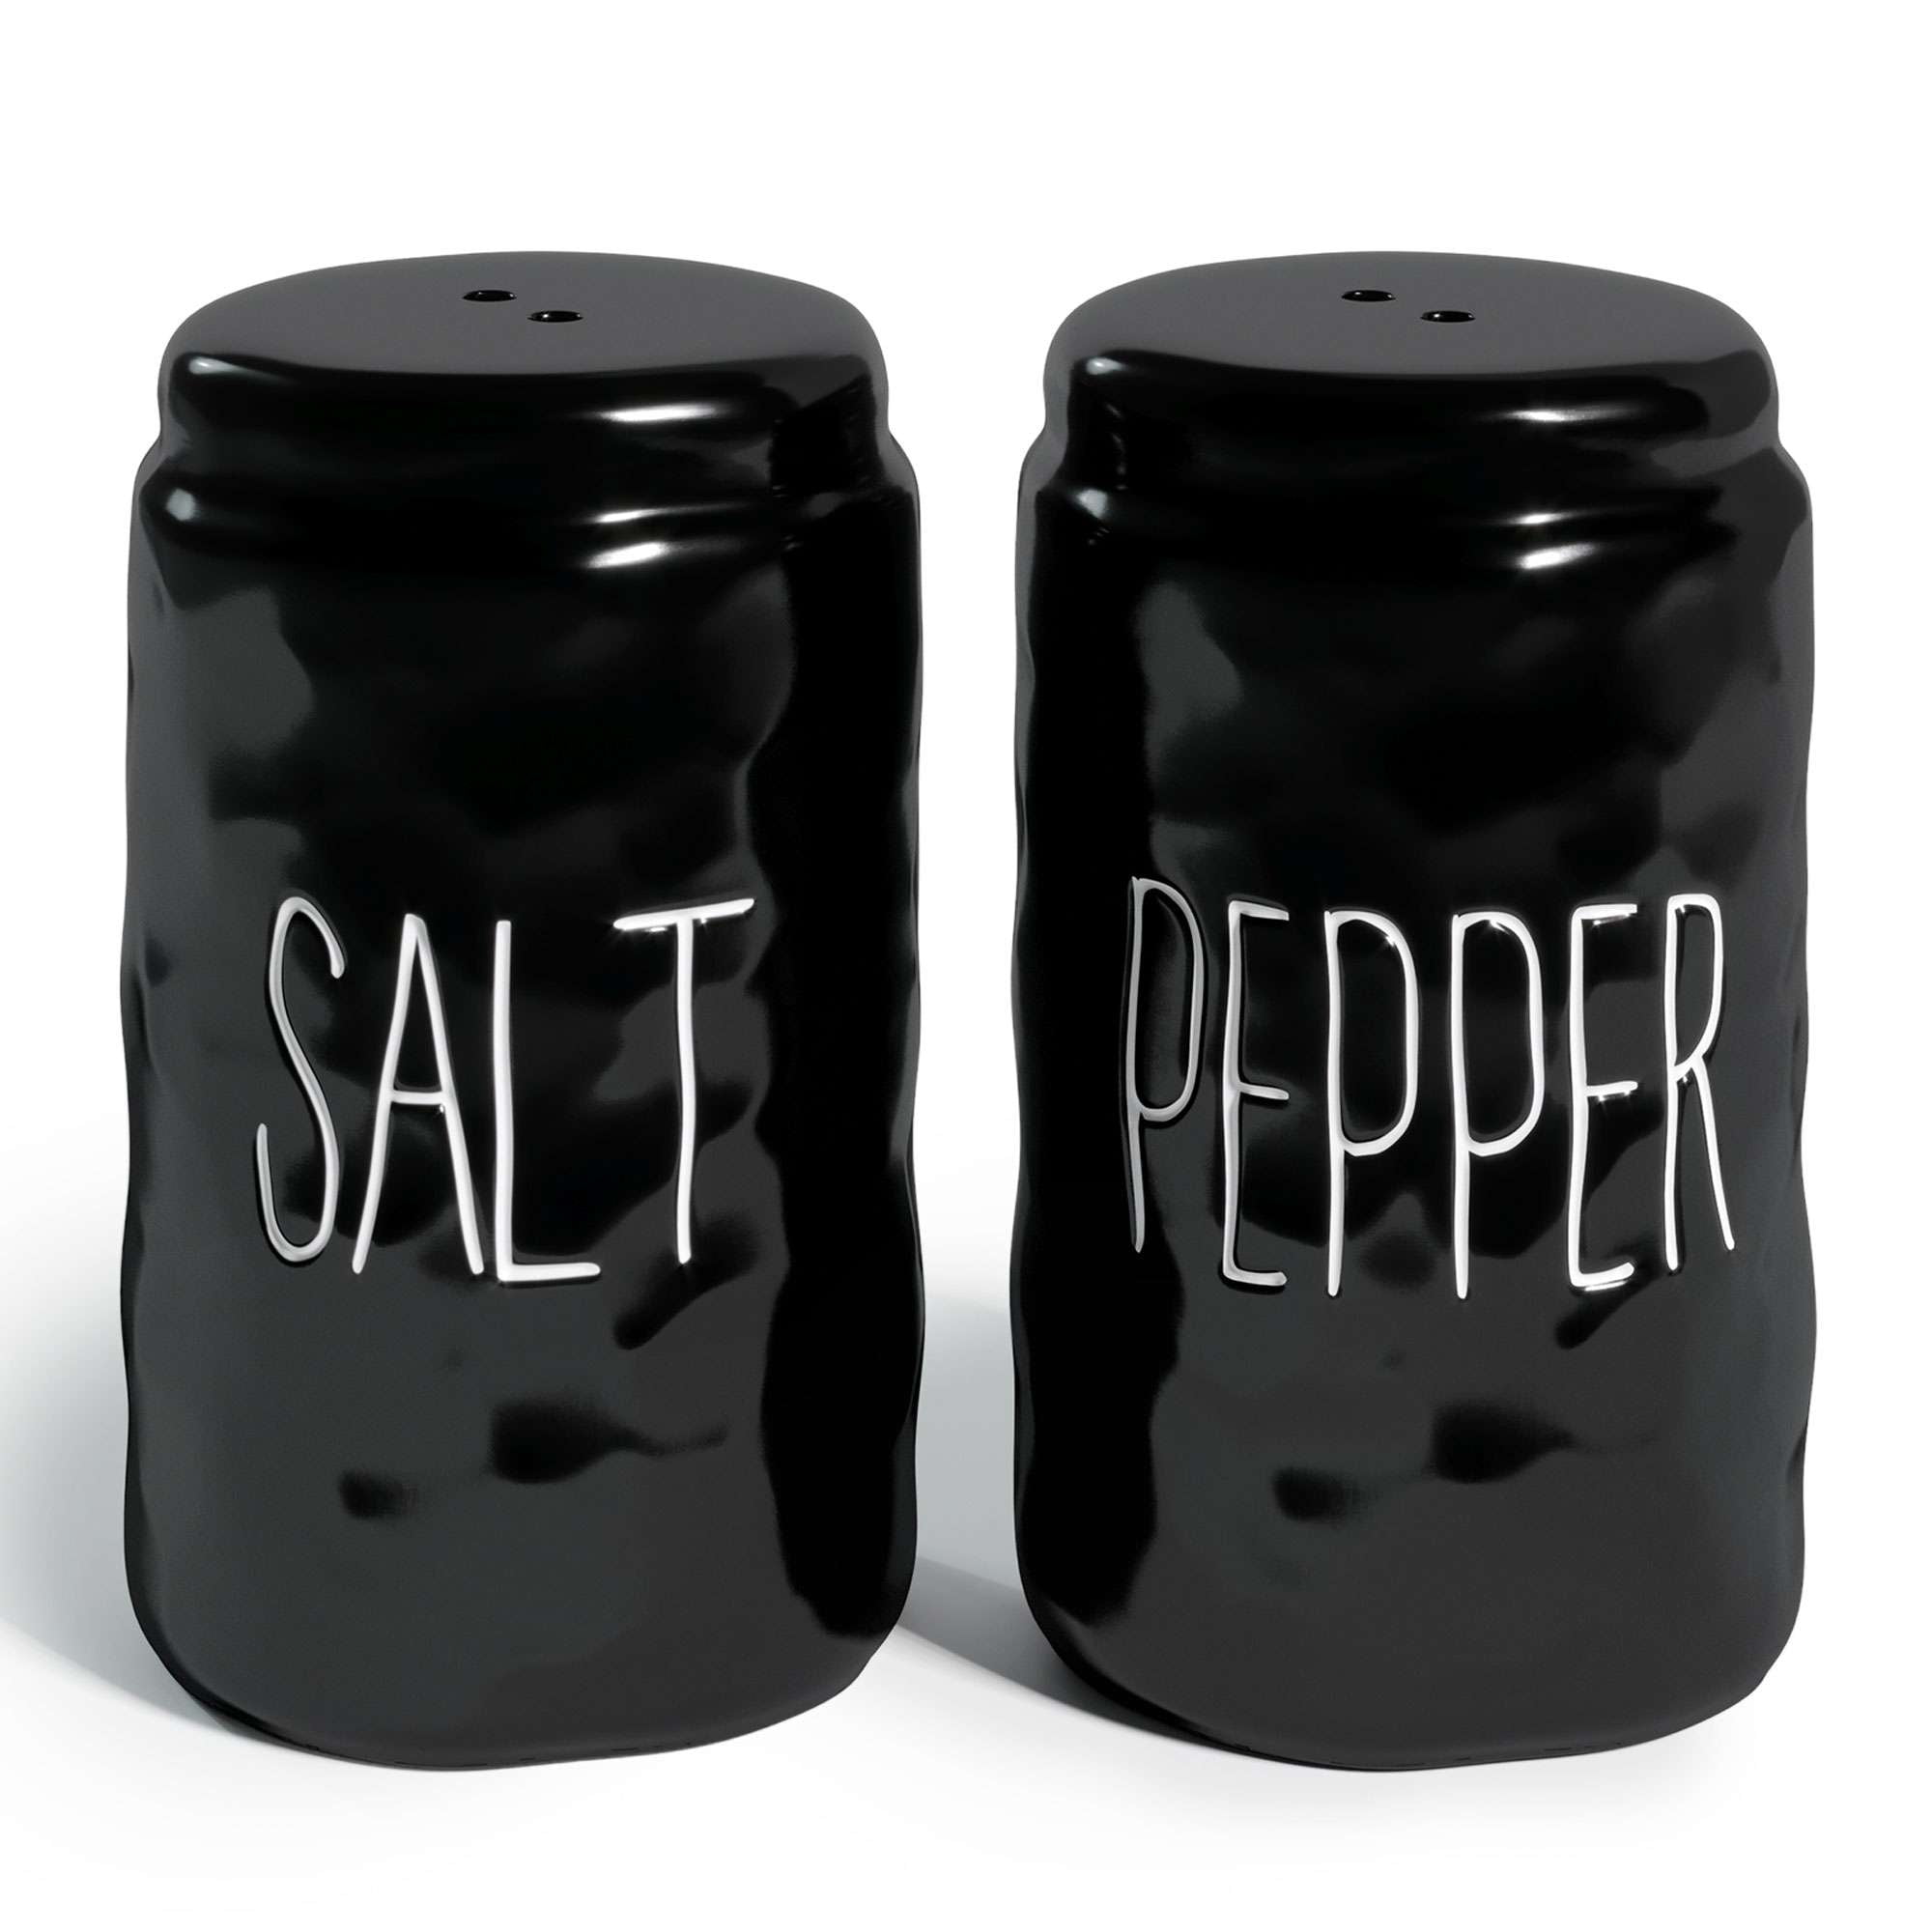 Farmhouse Salt and Pepper Shakers Set Rustic Shabby Chic for Vintage Modern Farmhouse Decor for Kitchen Home Restaurant Wedding Ceramic Salt and Pepper Shakers Cute in Black White 